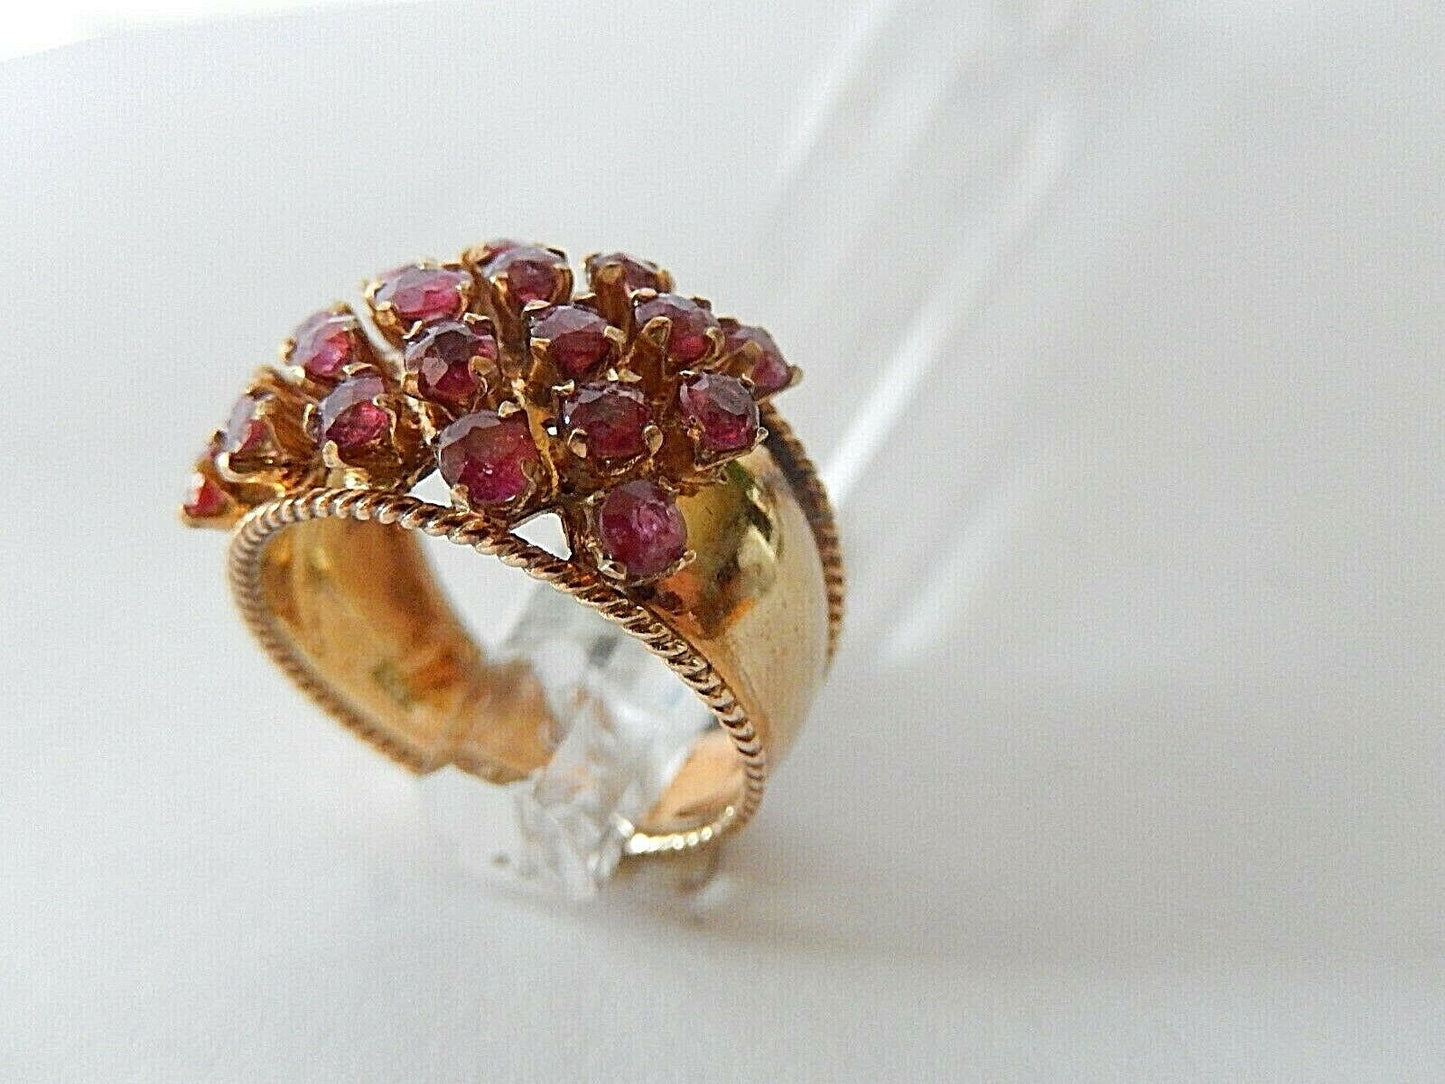 GORGEOUS VINTAGE 18K YELLOW GOLD RING WITH 1.50 CTW NATURAL RUBIES Sz 7